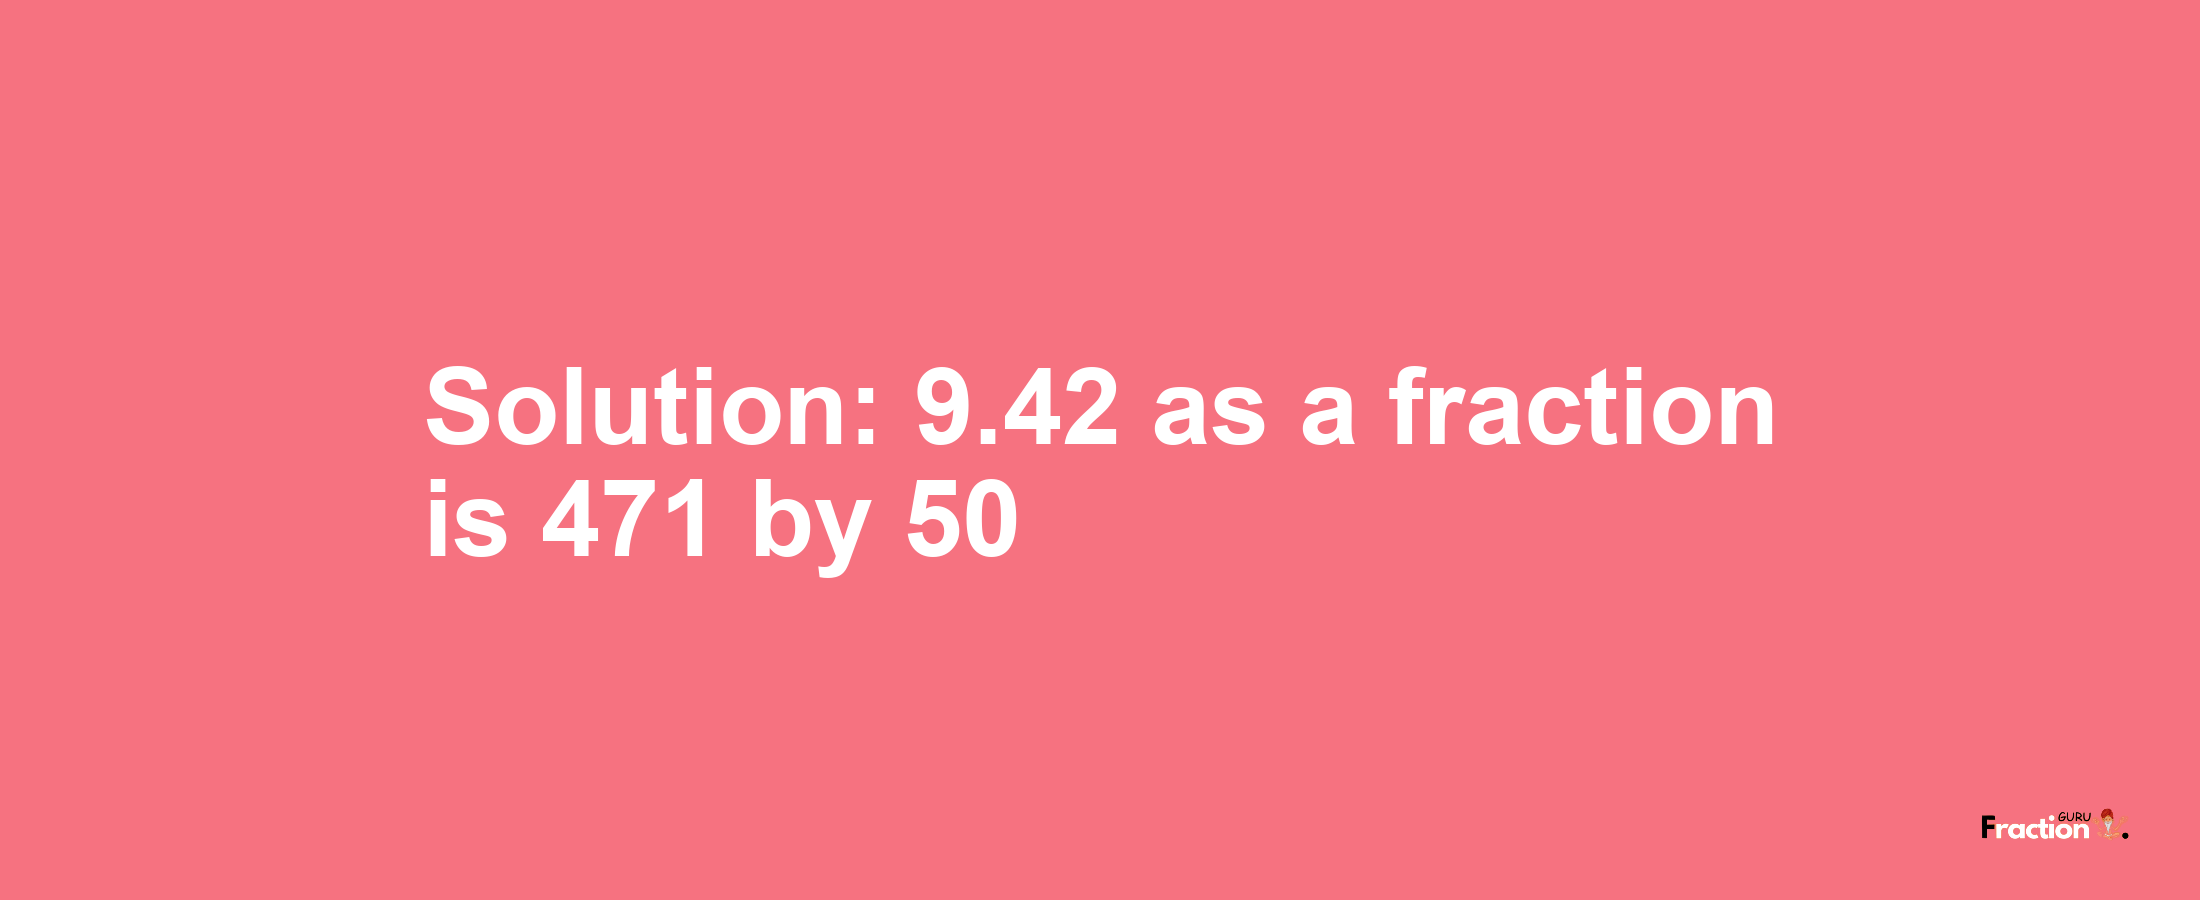 Solution:9.42 as a fraction is 471/50